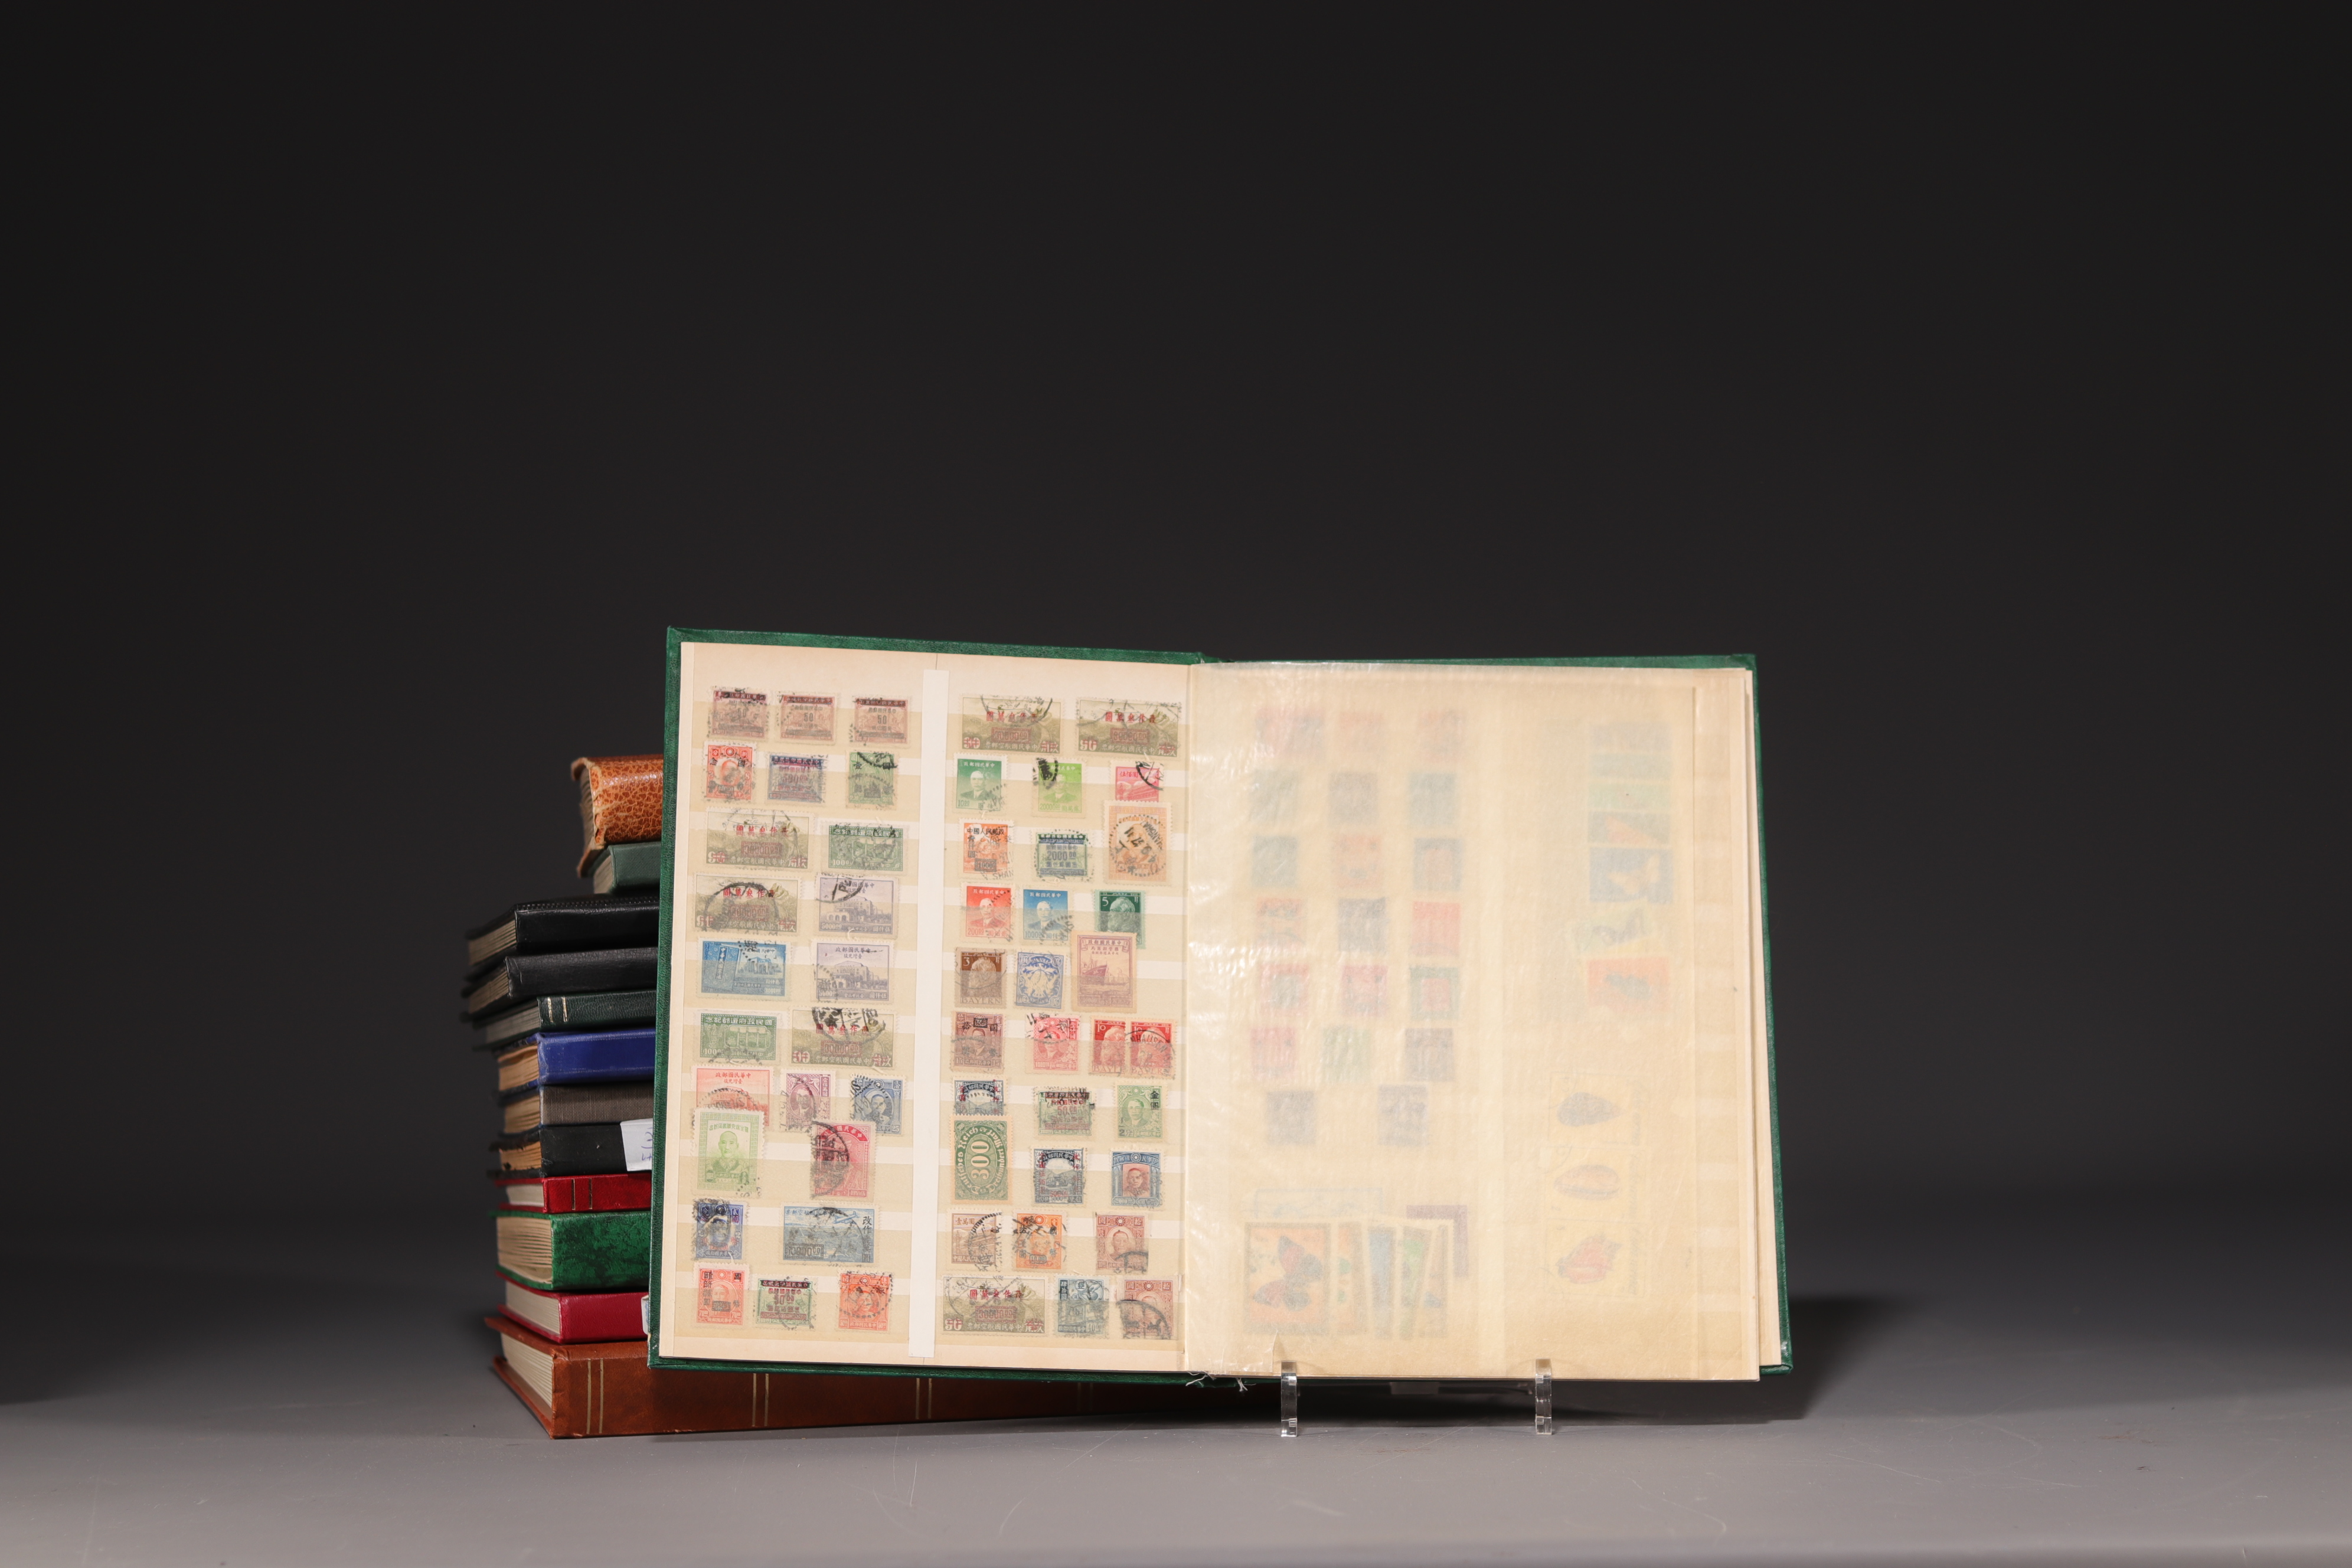 Set of 26 albums of world stamps, China, Japan, Middle East, Europe, etc. (Lot 3) - Image 8 of 17